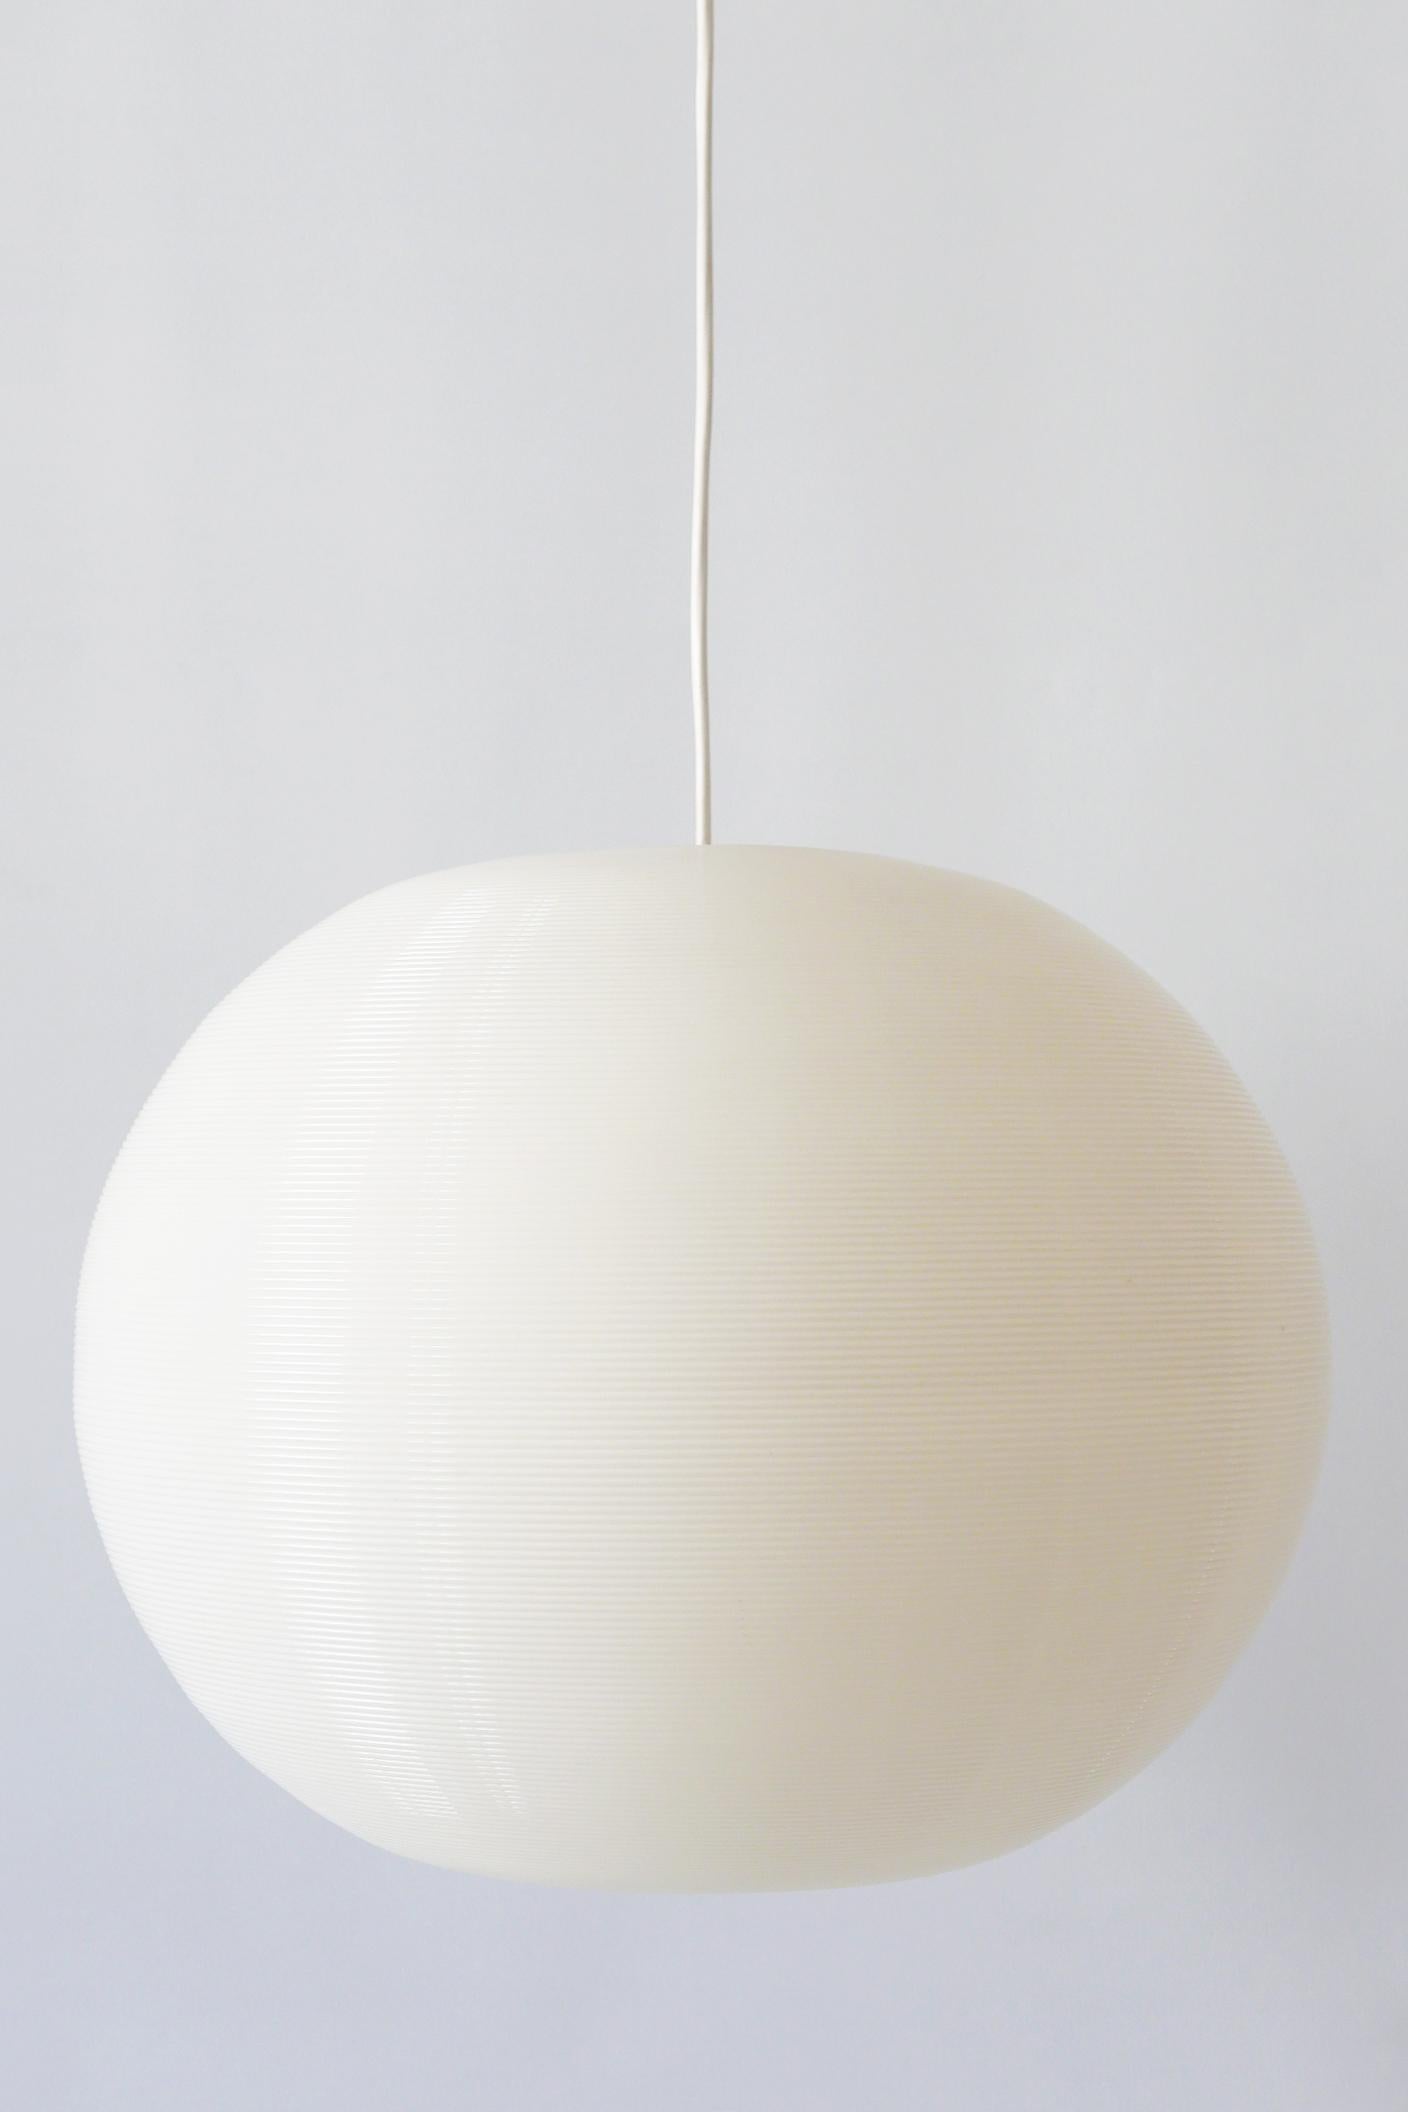 Lovely Mid-Century Modern pendant lamp or hanging light. Designed by Yasha Heifetz for Rotaflex Heifetz, 1960s, USA.

Executed in spun plastic, it comes with 1 x E27 Edison screw fit bulb holder, is rewired and in working condition. It runs both on